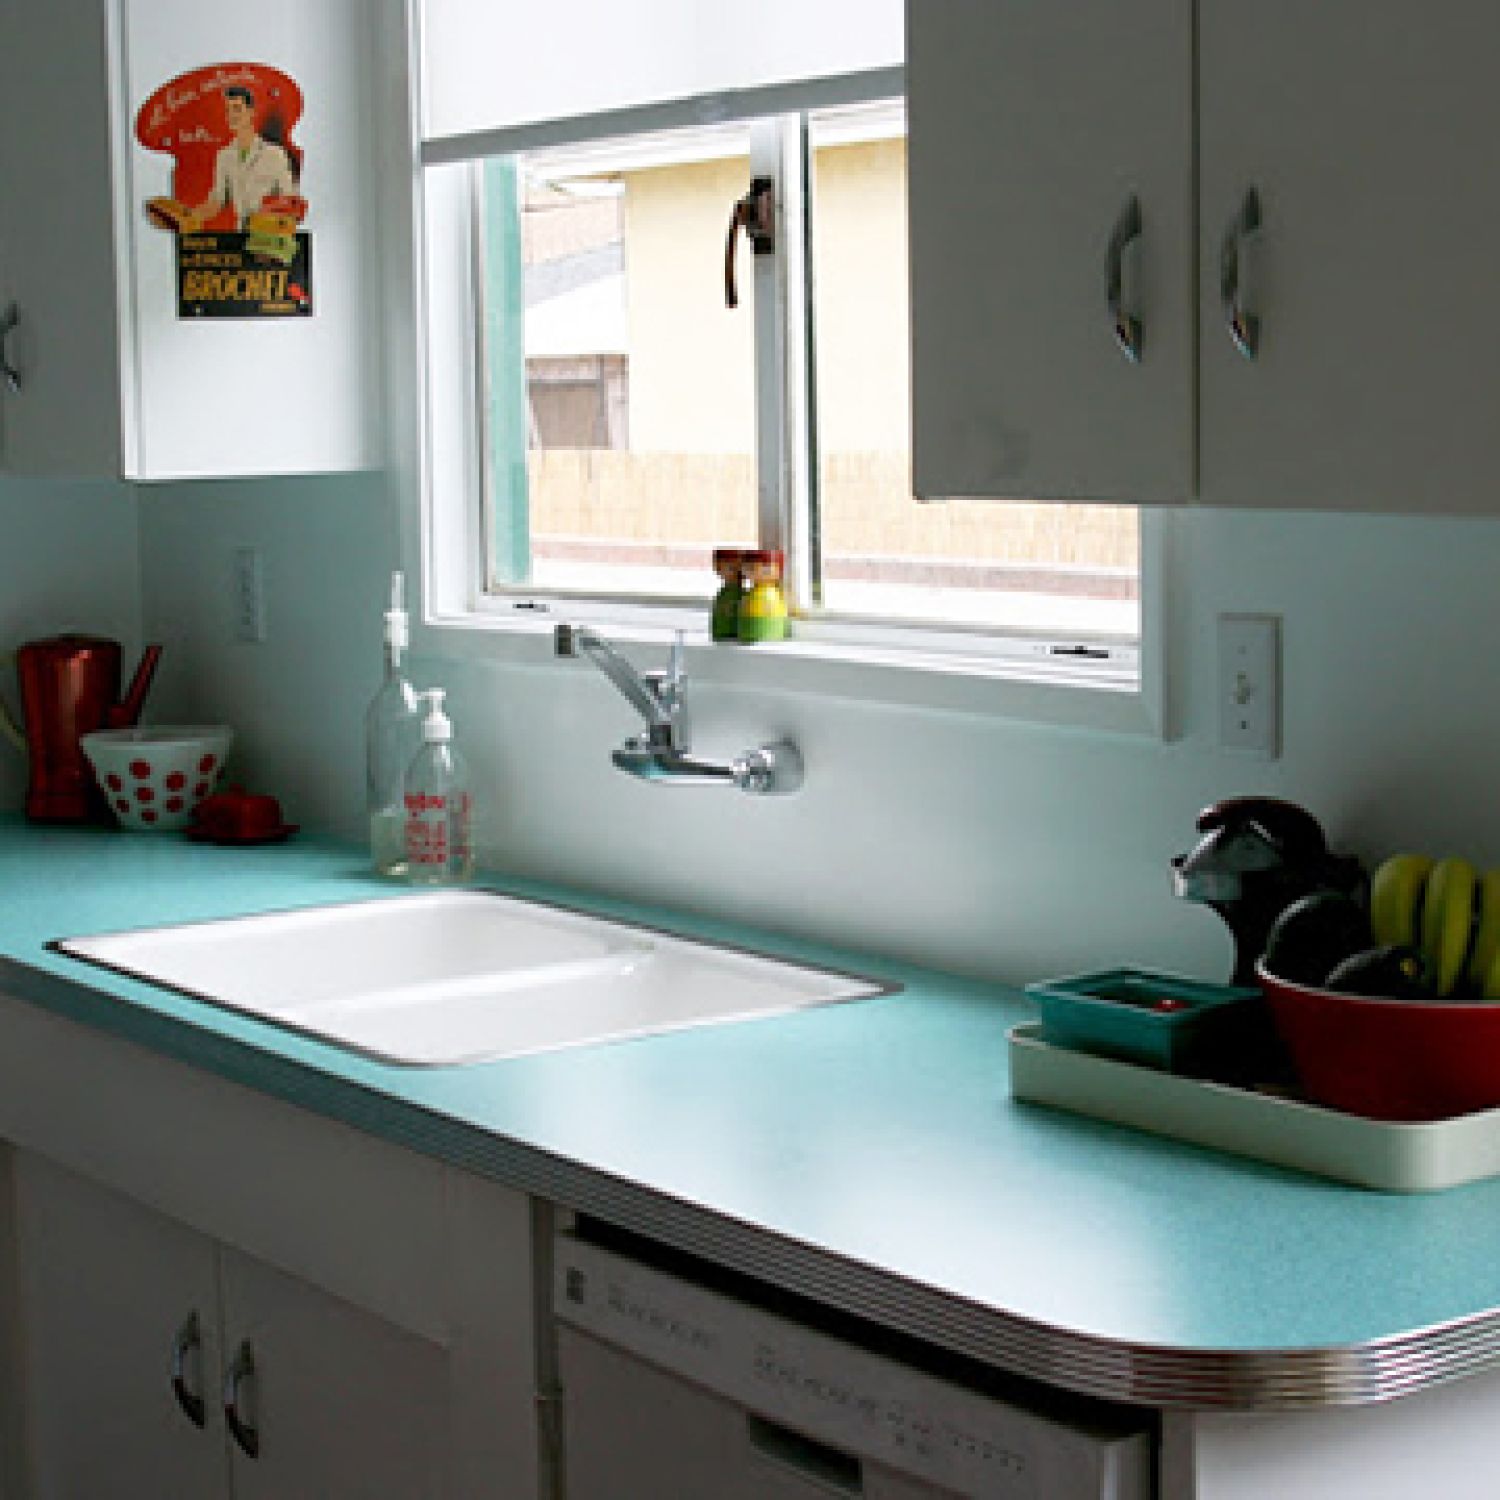 Retro remodel with Formica laminate kitchen countertops